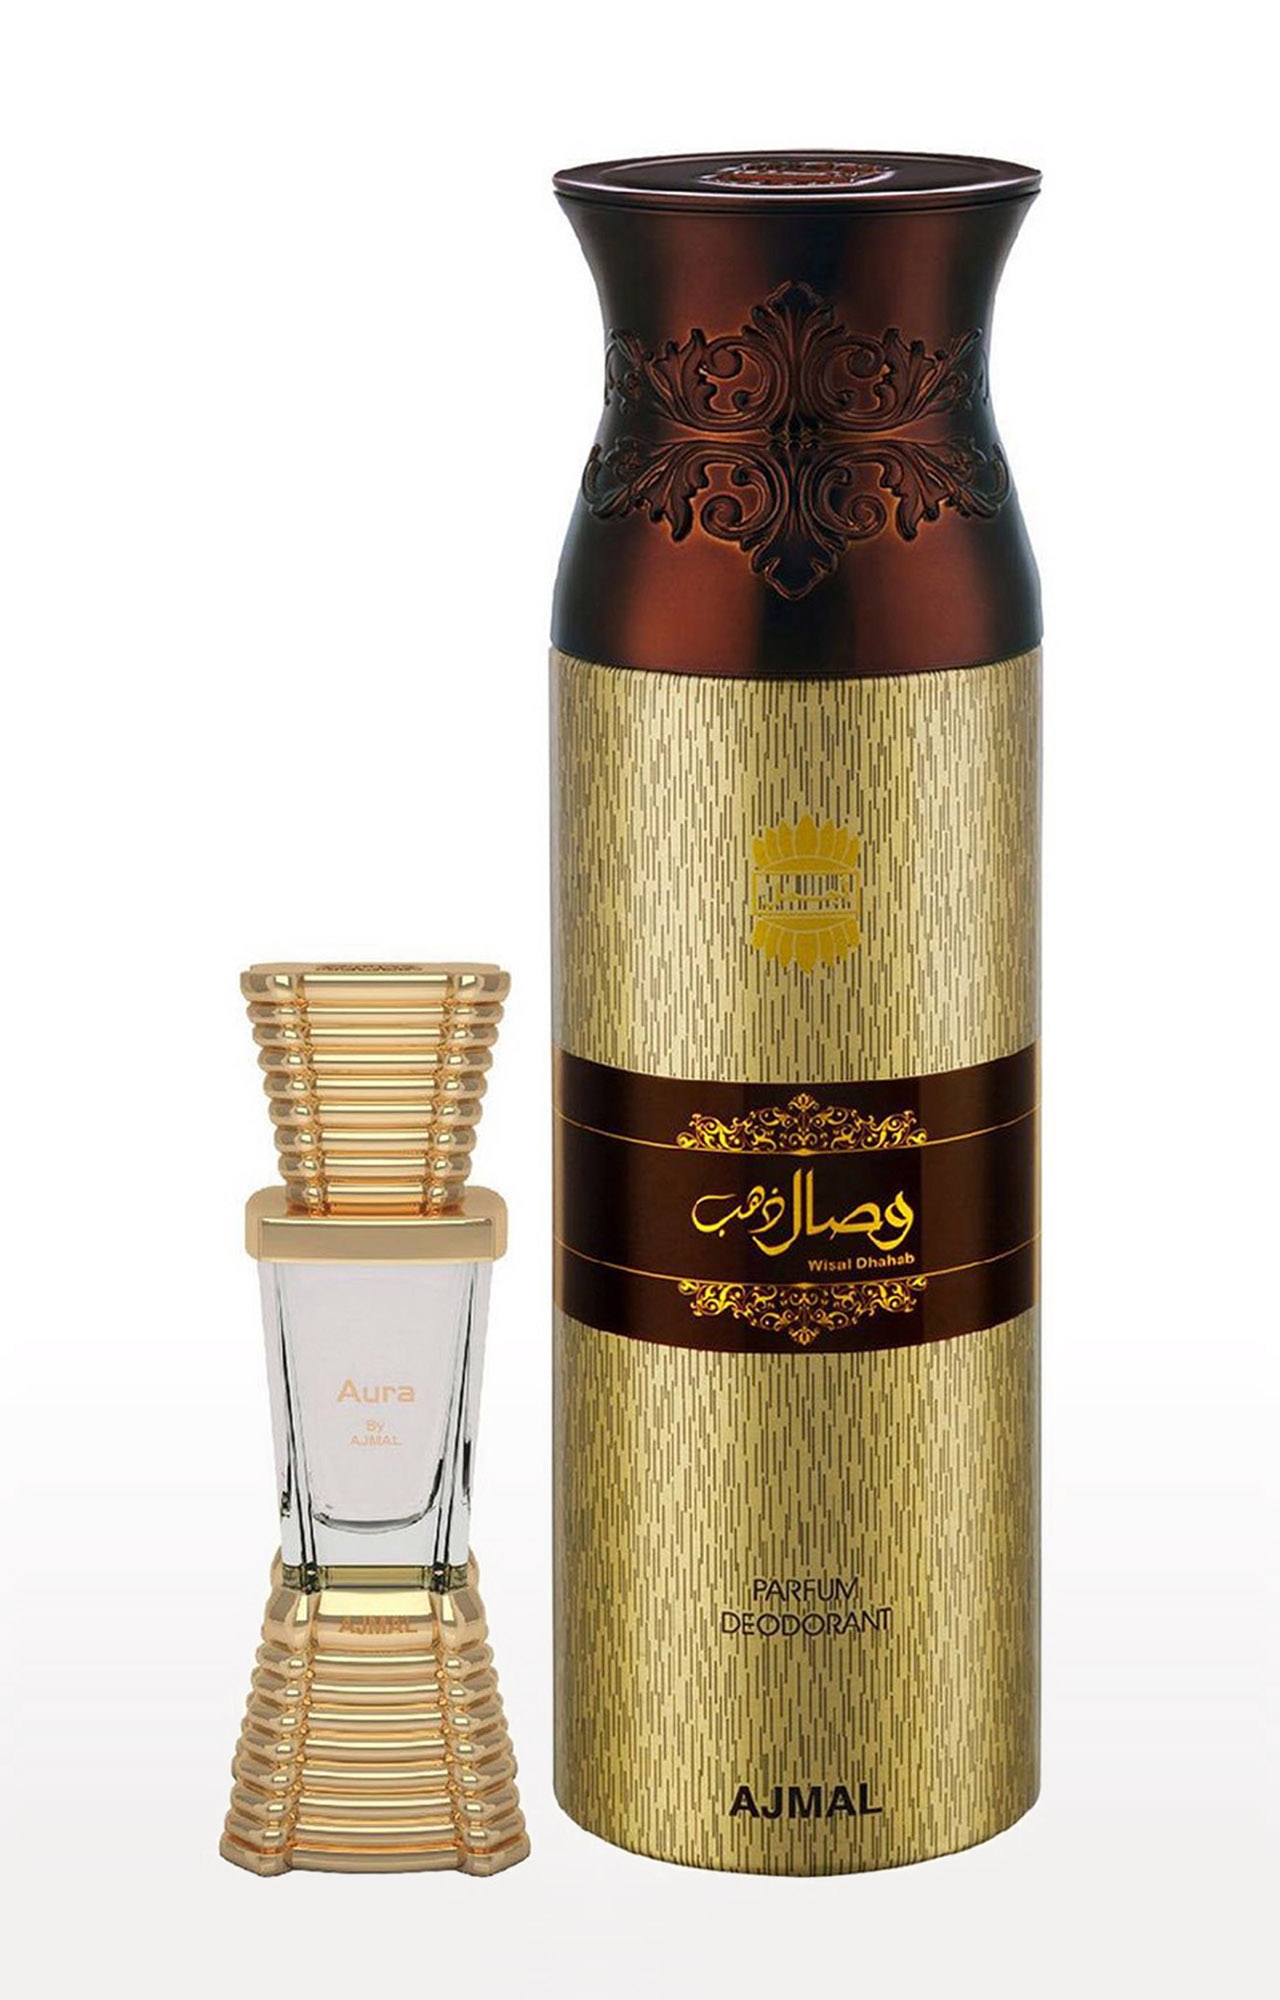 Ajmal | Ajmal Aura Concentrated Perfume Oil Floral Fruity Alcohol- Attar 10Ml For Unisex And Wisal Dhahab Deodorant Fruity Floral Fragrance 200Ml For Men